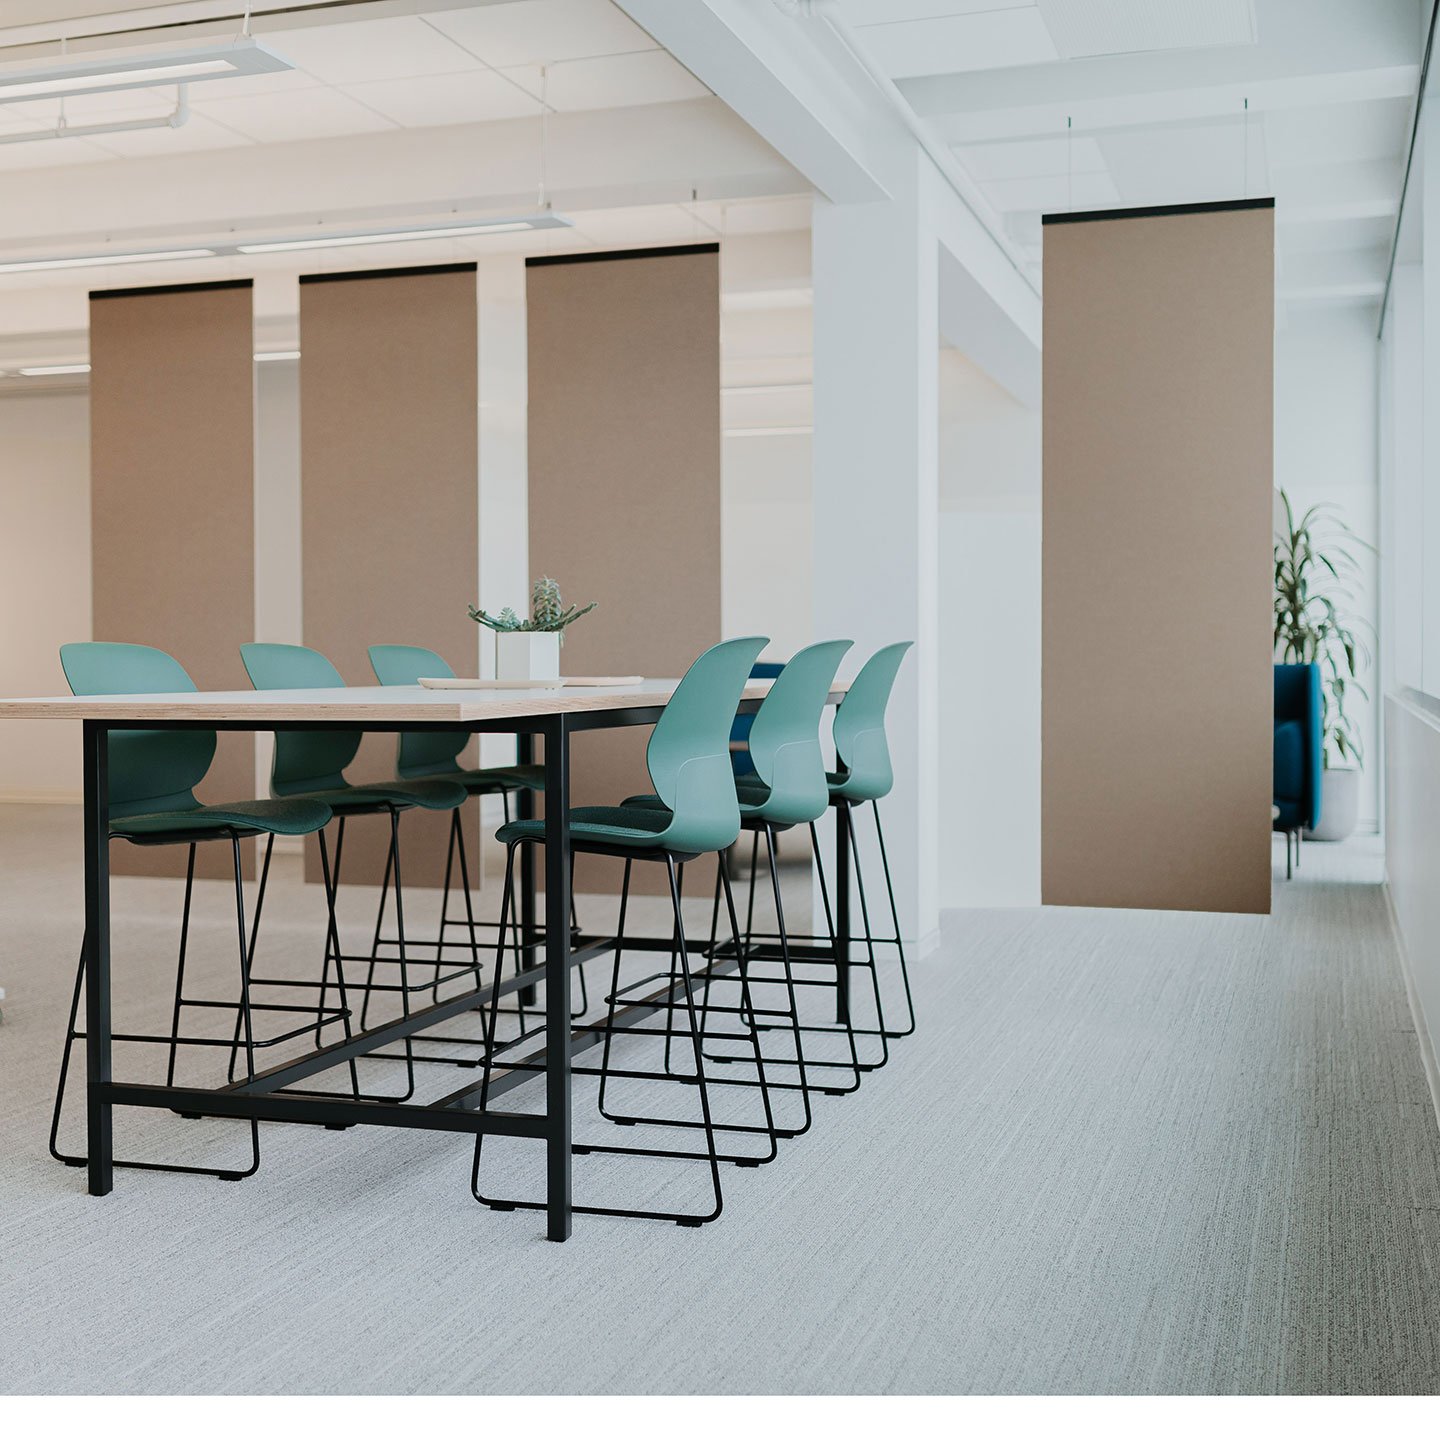 Haworth Buzzifalls screen in brown color in open office space and tall table for collaboration